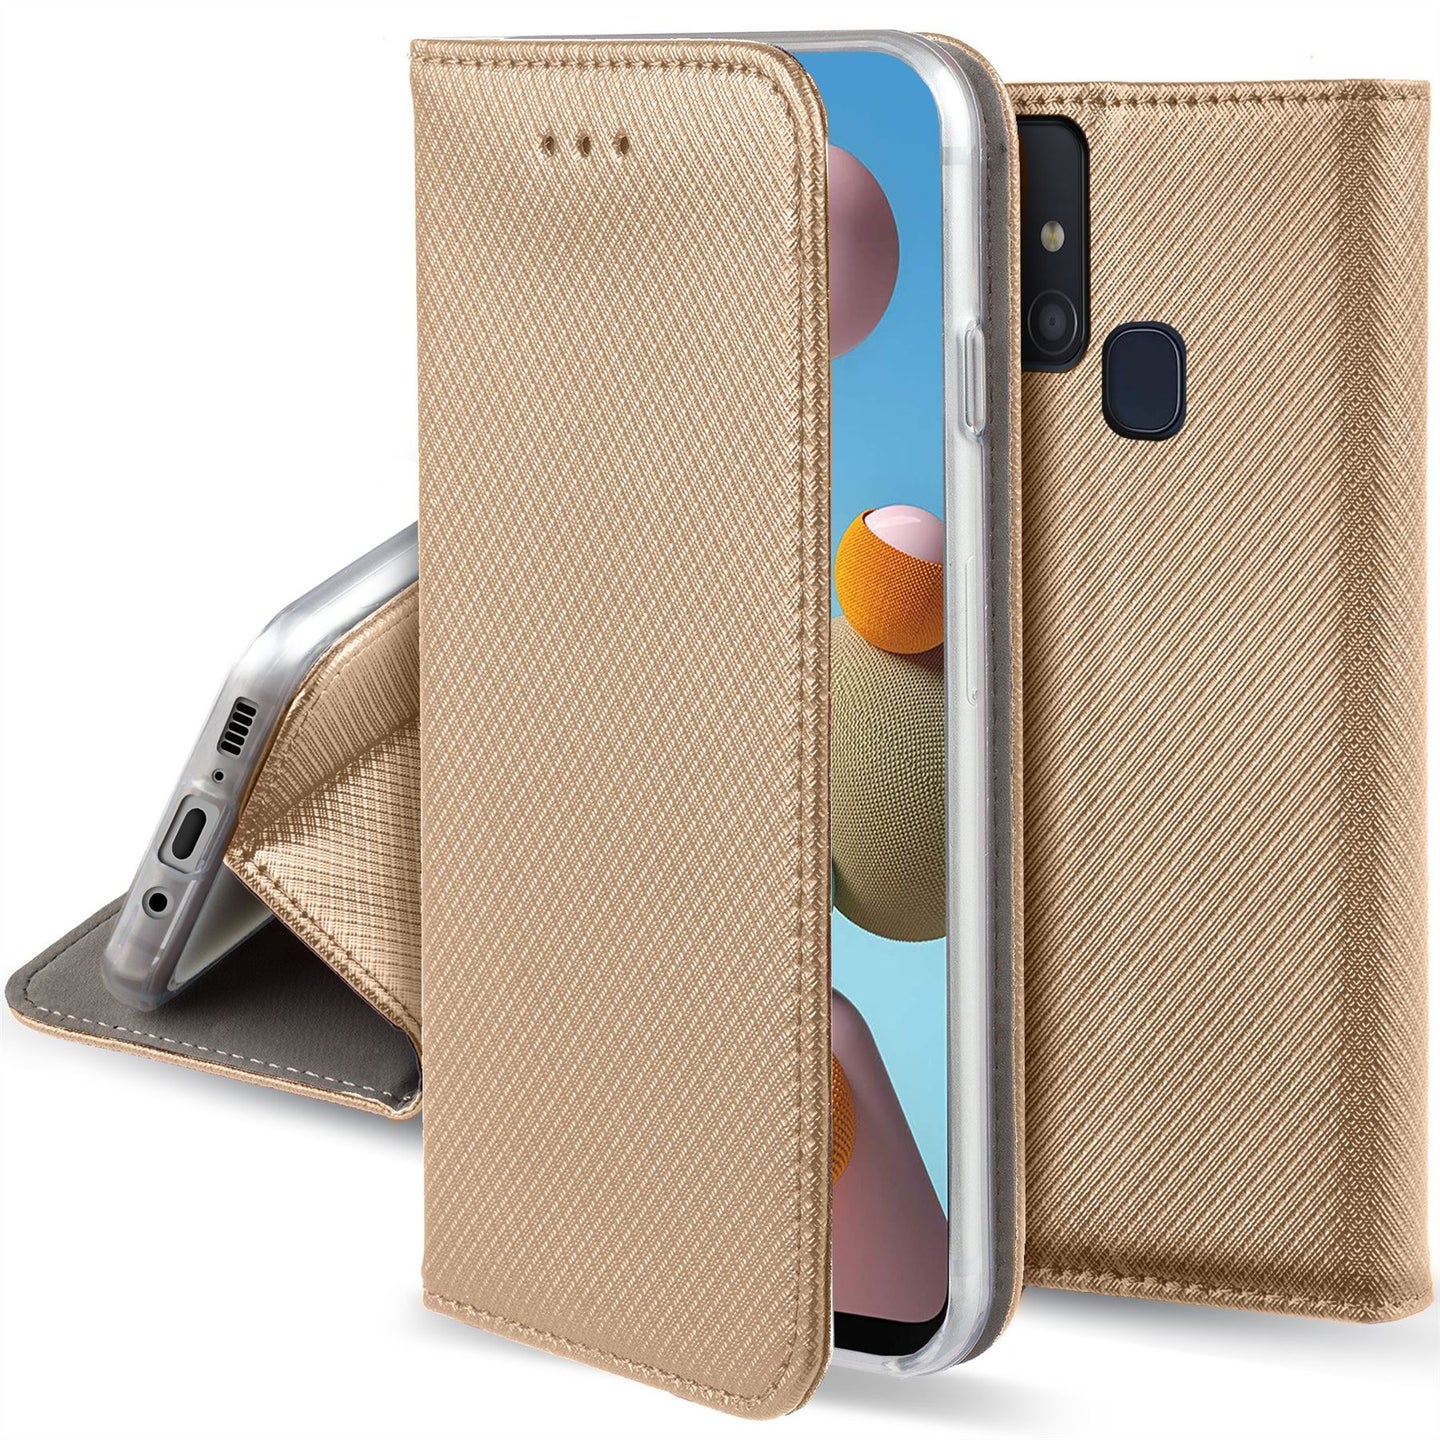 Moozy Case Flip Cover for Samsung A21s, Gold - Smart Magnetic Flip Case with Card Holder and Stand